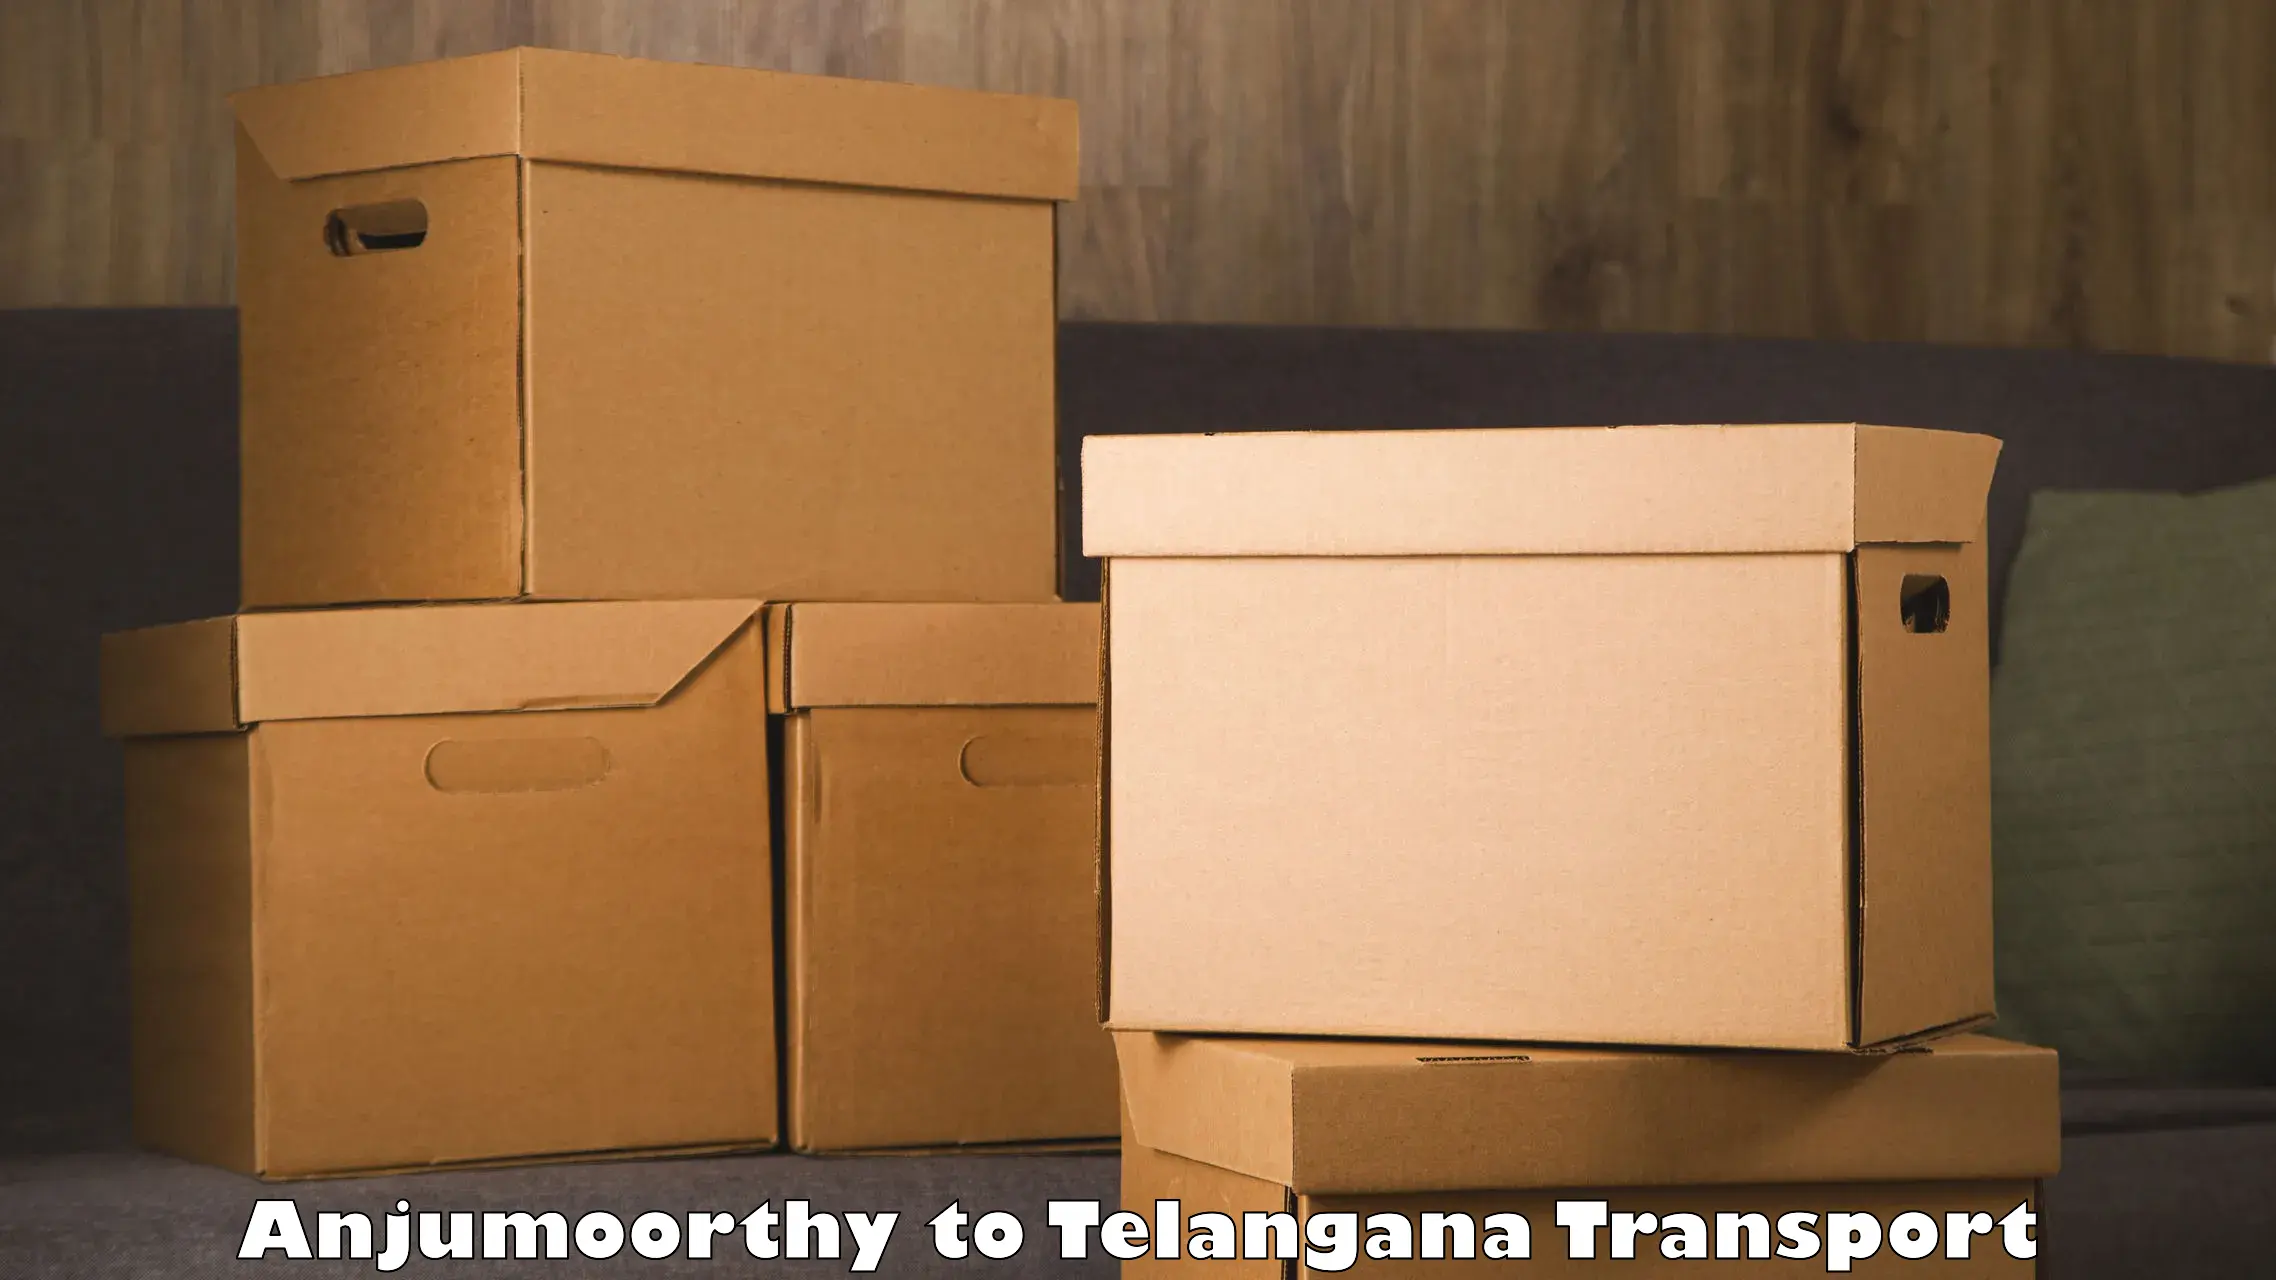 Express transport services in Anjumoorthy to Alair